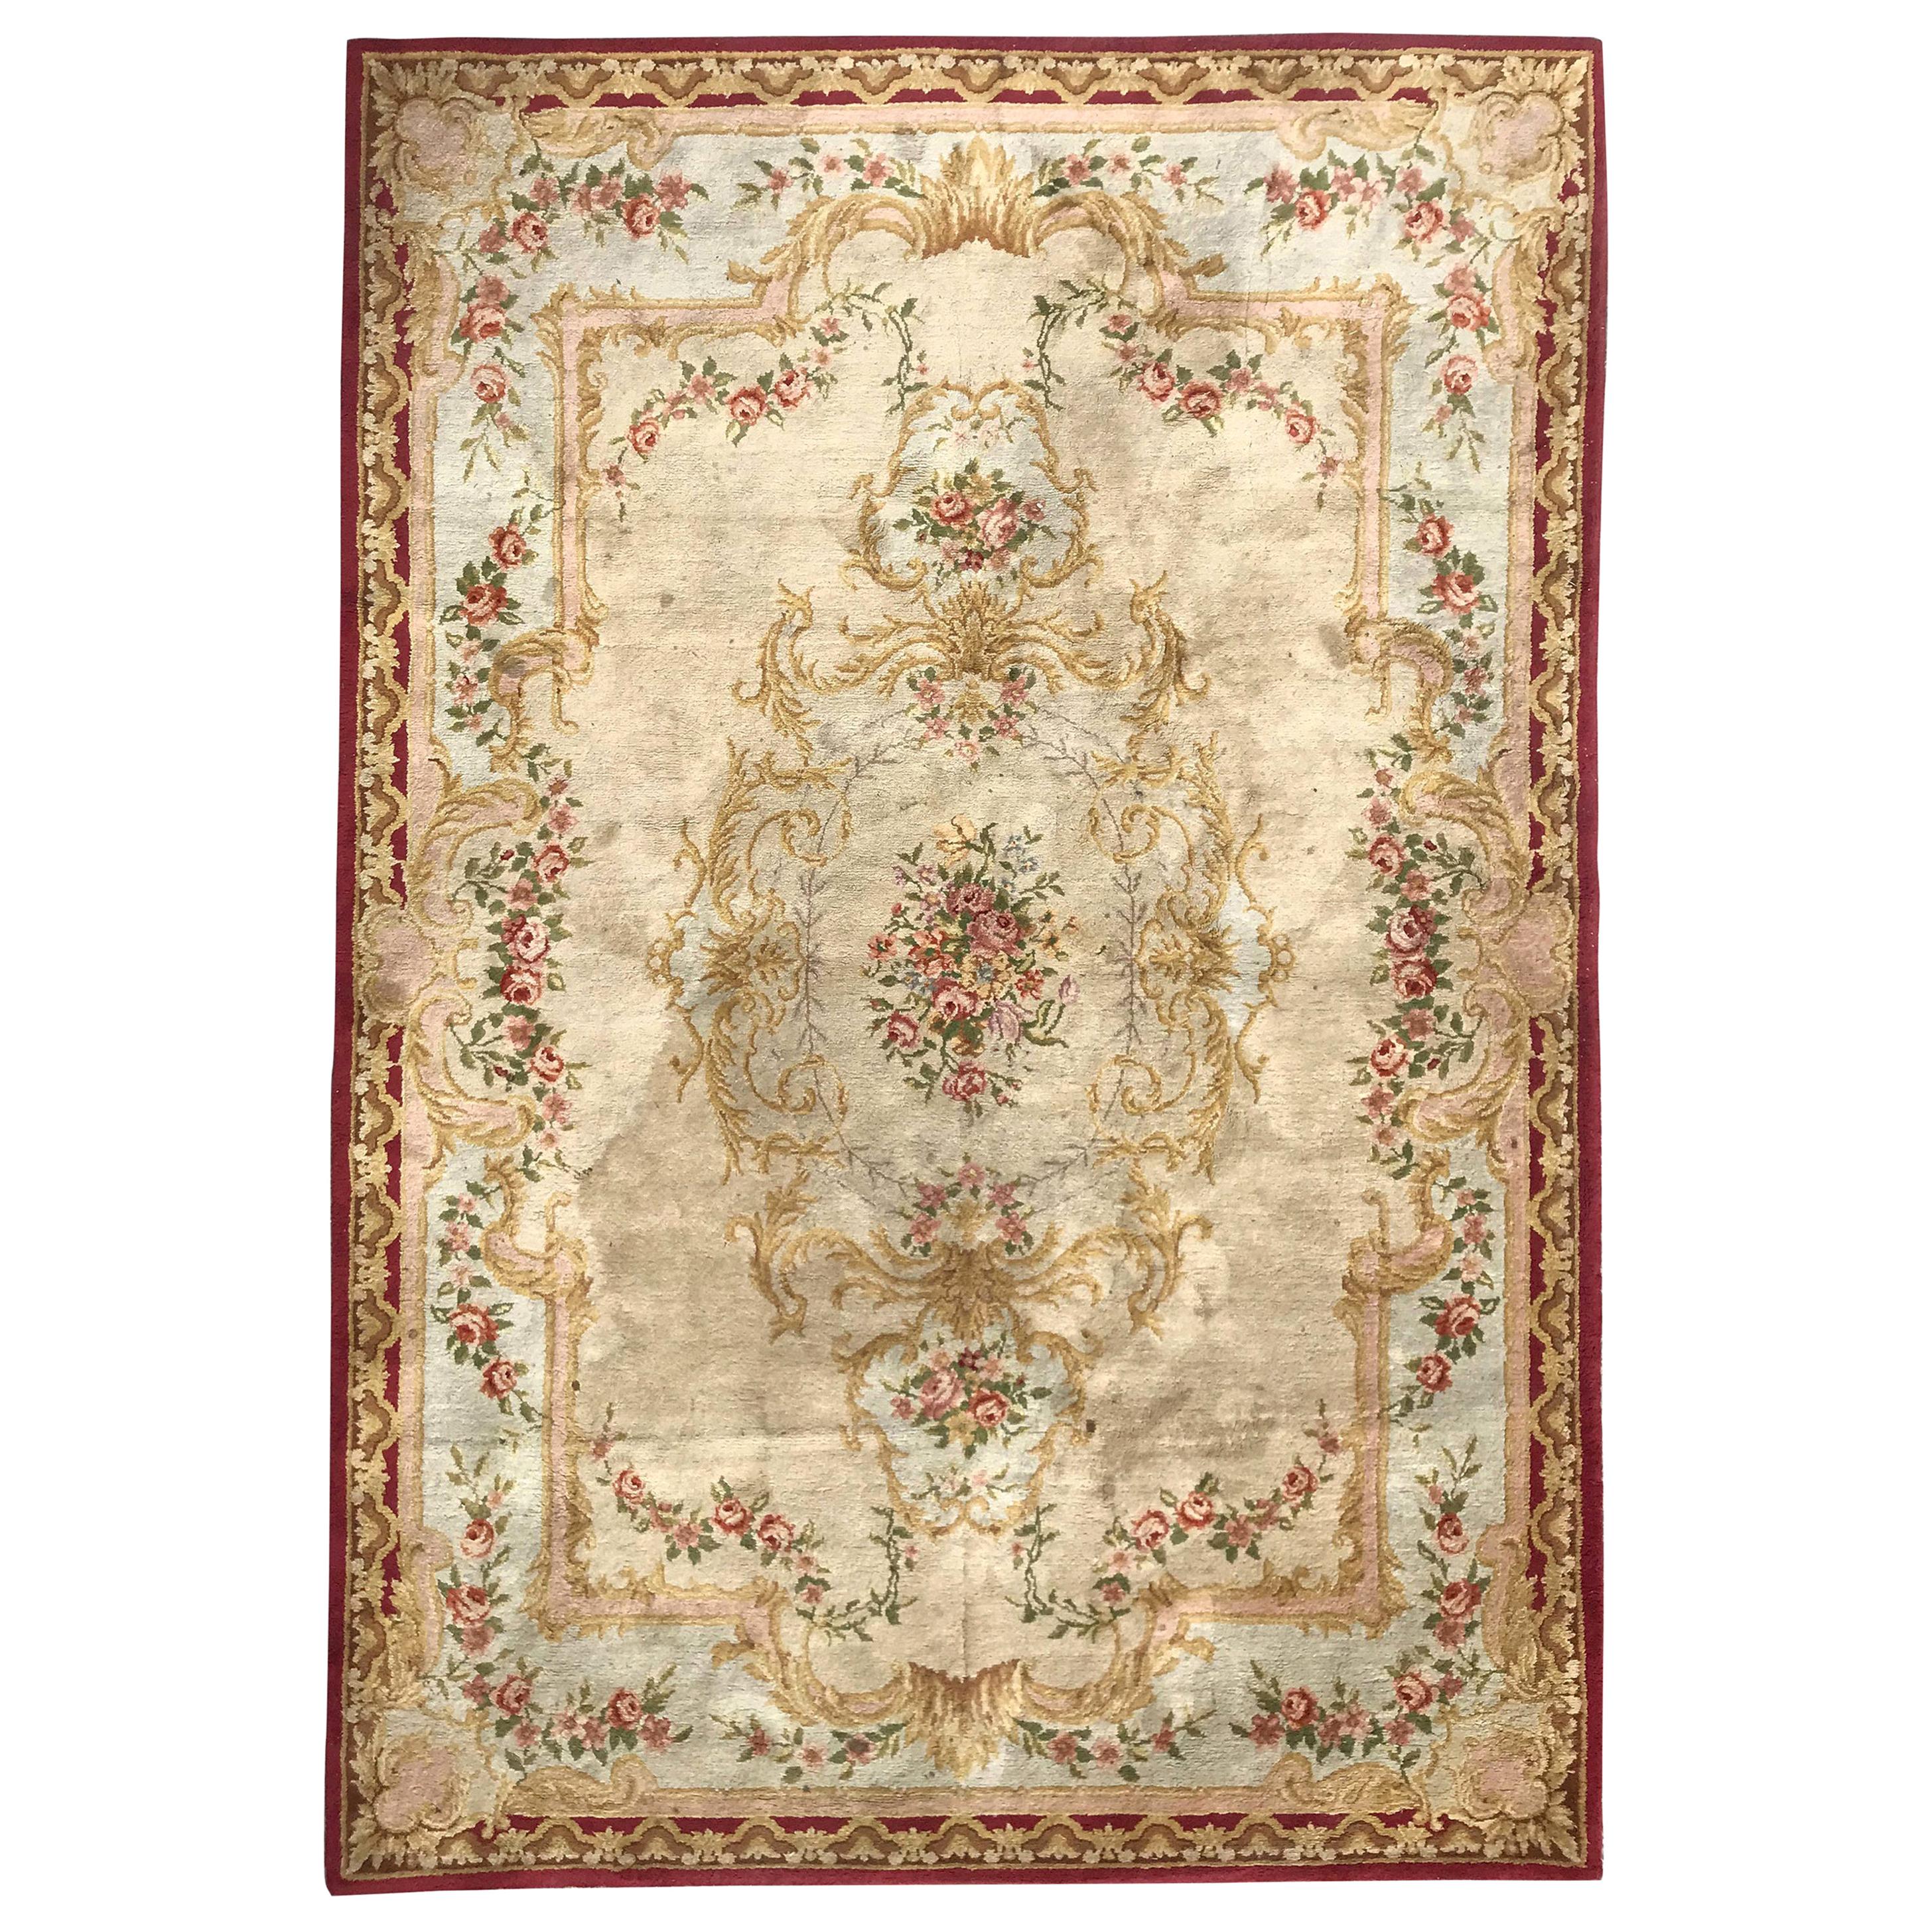 Large Antique French Savonnerie 19th Century Rug